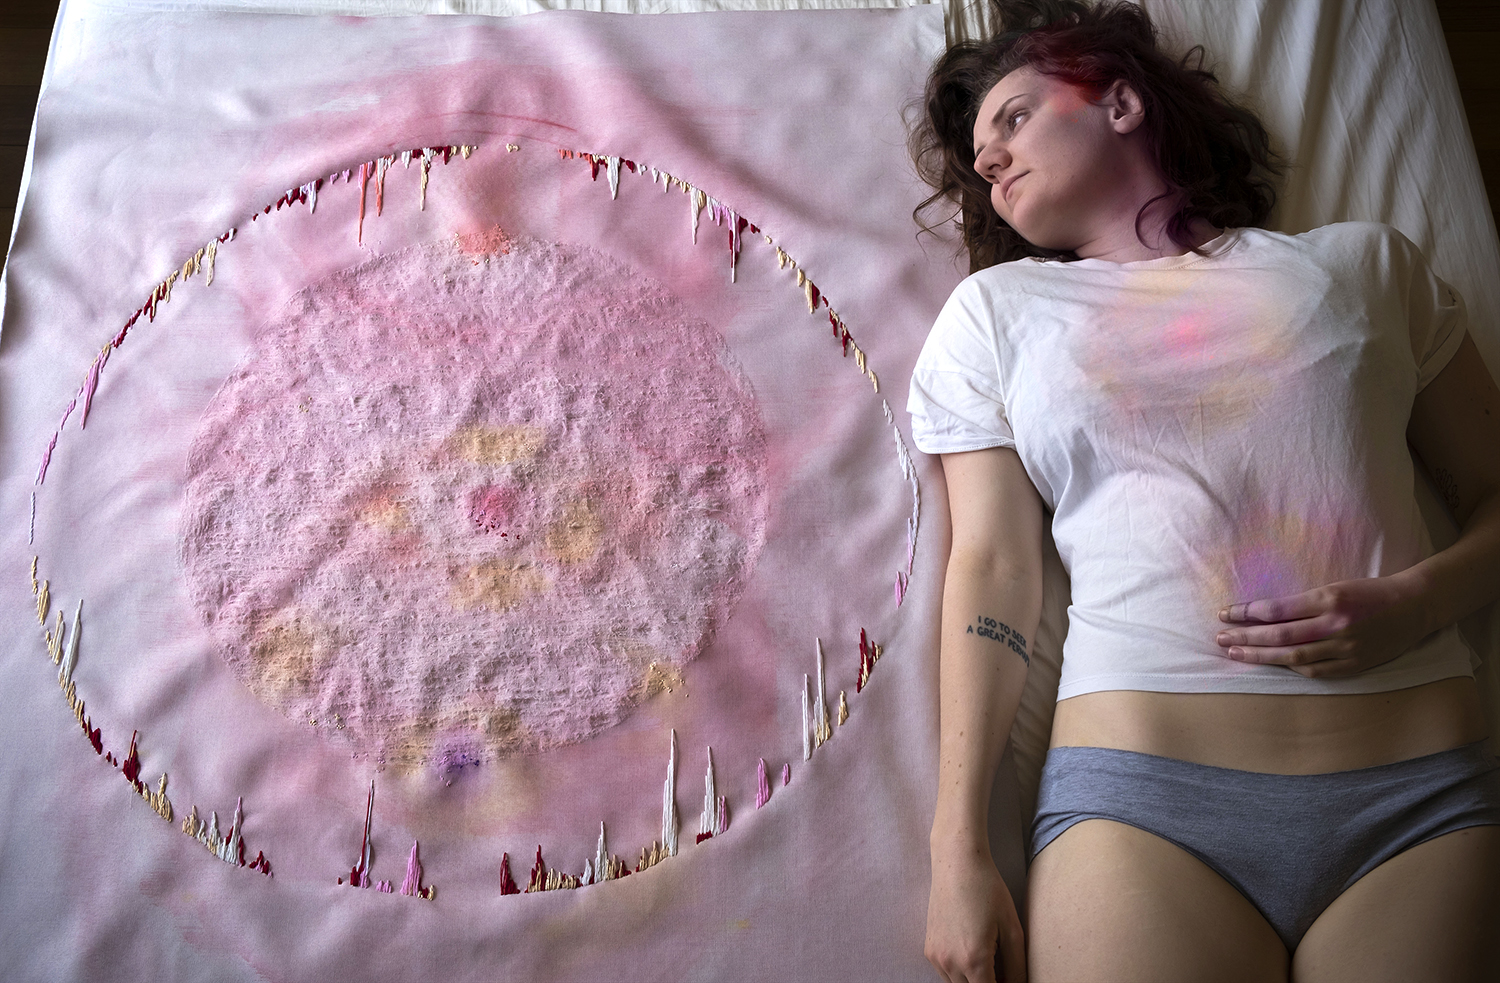 Linen fabric painted light pink. Roughed up circle in the middle of fabric with an embroidered circle around it. Performer laying next to fabric with repeated colors and patterns on their body.